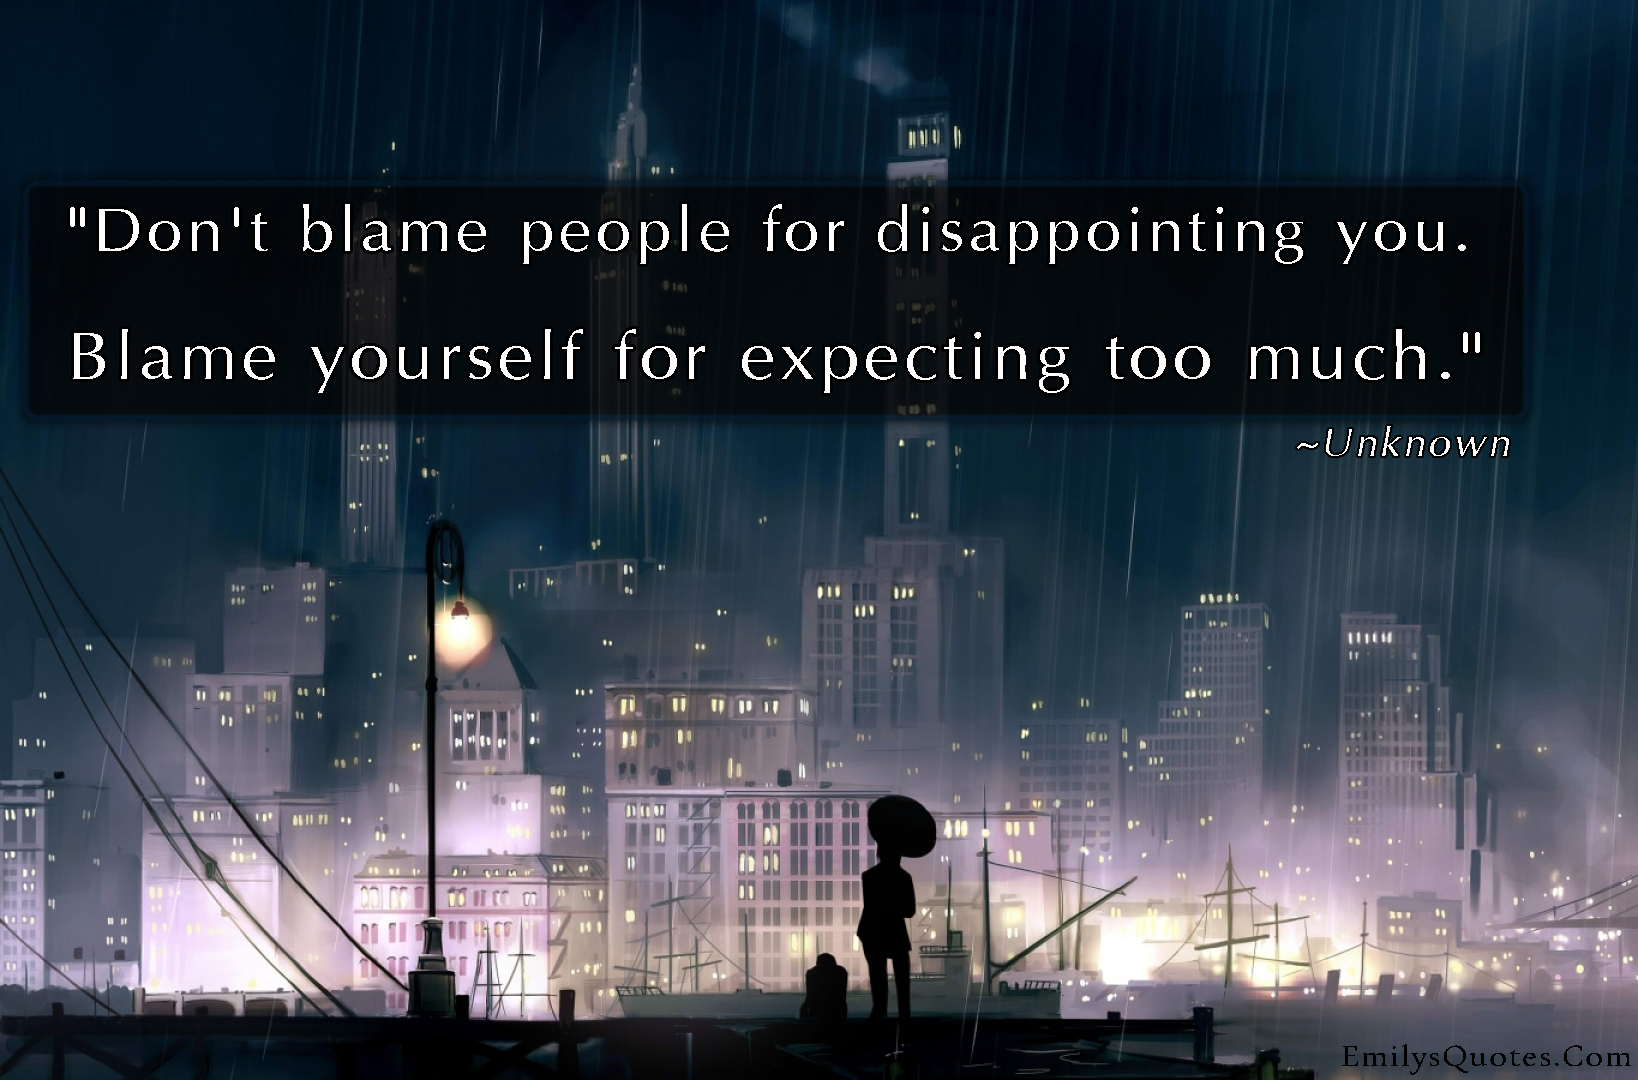 Don’t blame people for disappointing you. Blame yourself for expecting too much